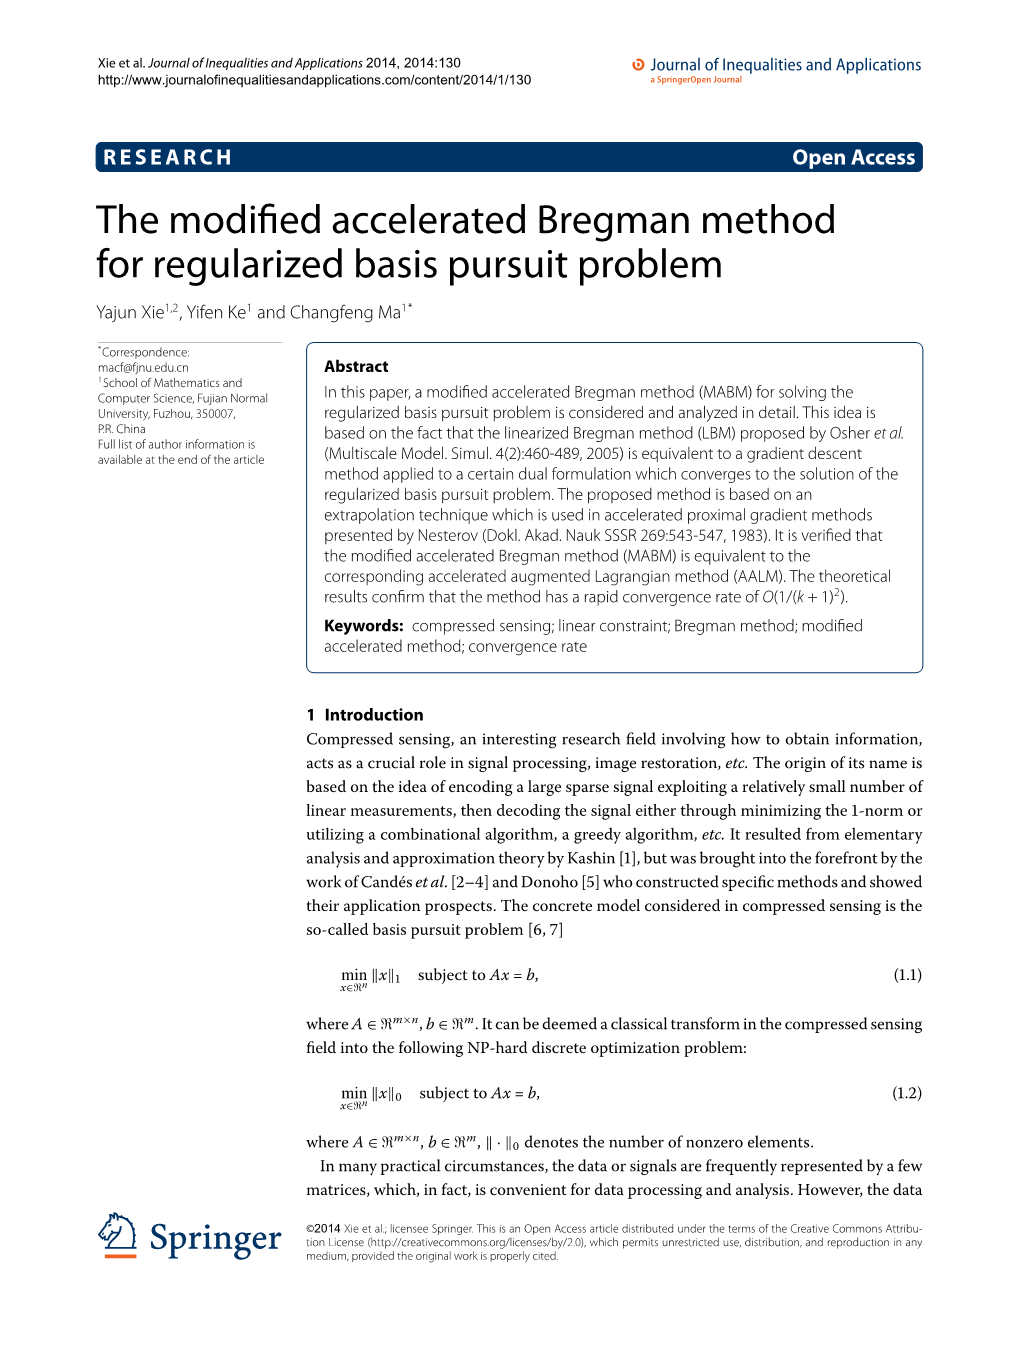 The Modified Accelerated Bregman Method for Regularized Basis Pursuit